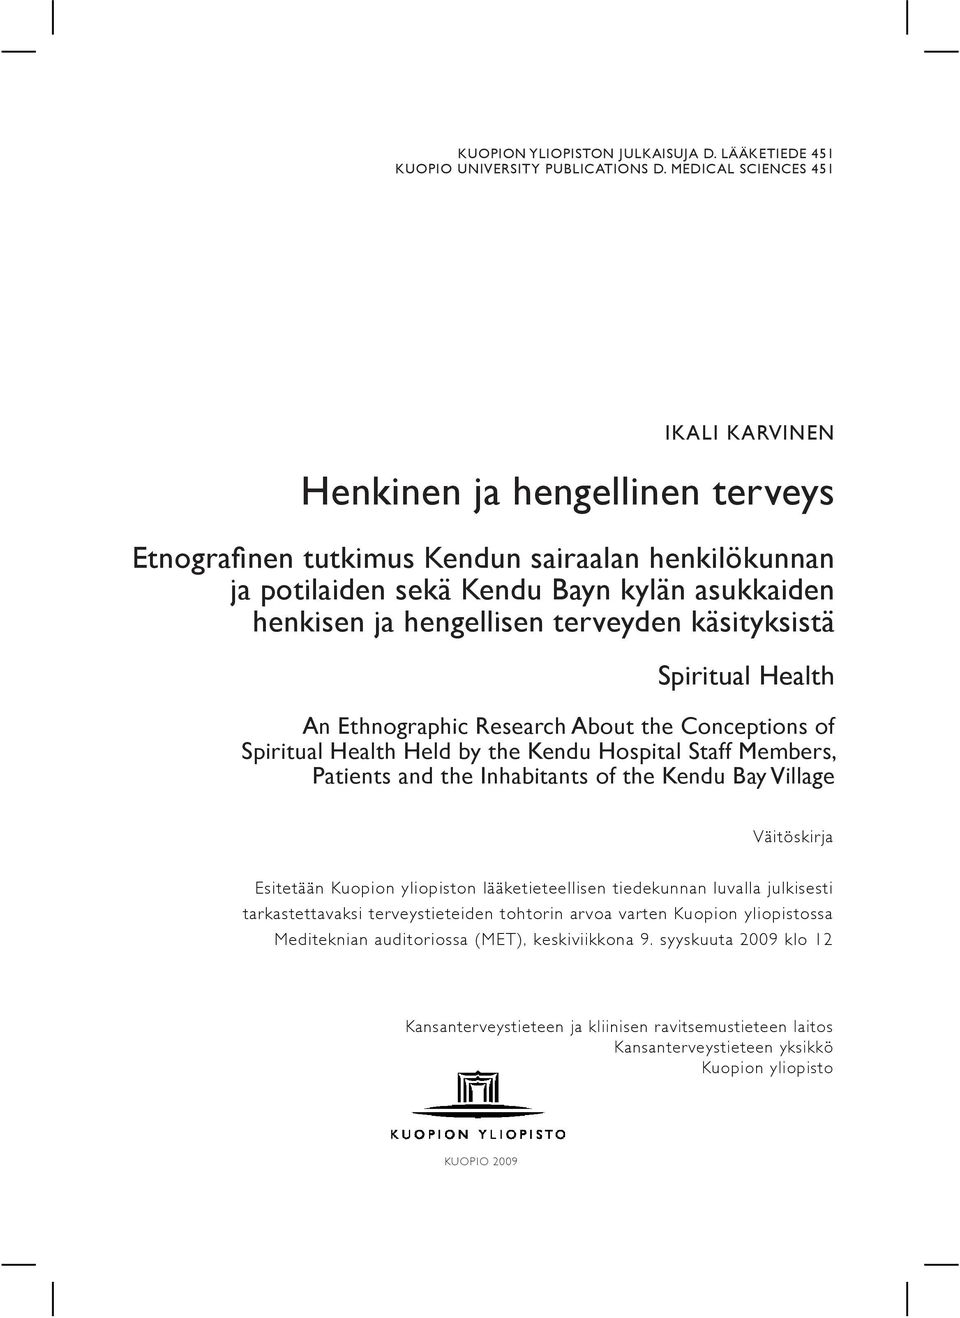 terveyden käsityksistä Spiritual Health An Ethnographic Research About the Conceptions of Spiritual Health Held by the Kendu Hospital Staff Members, Patients and the Inhabitants of the Kendu Bay